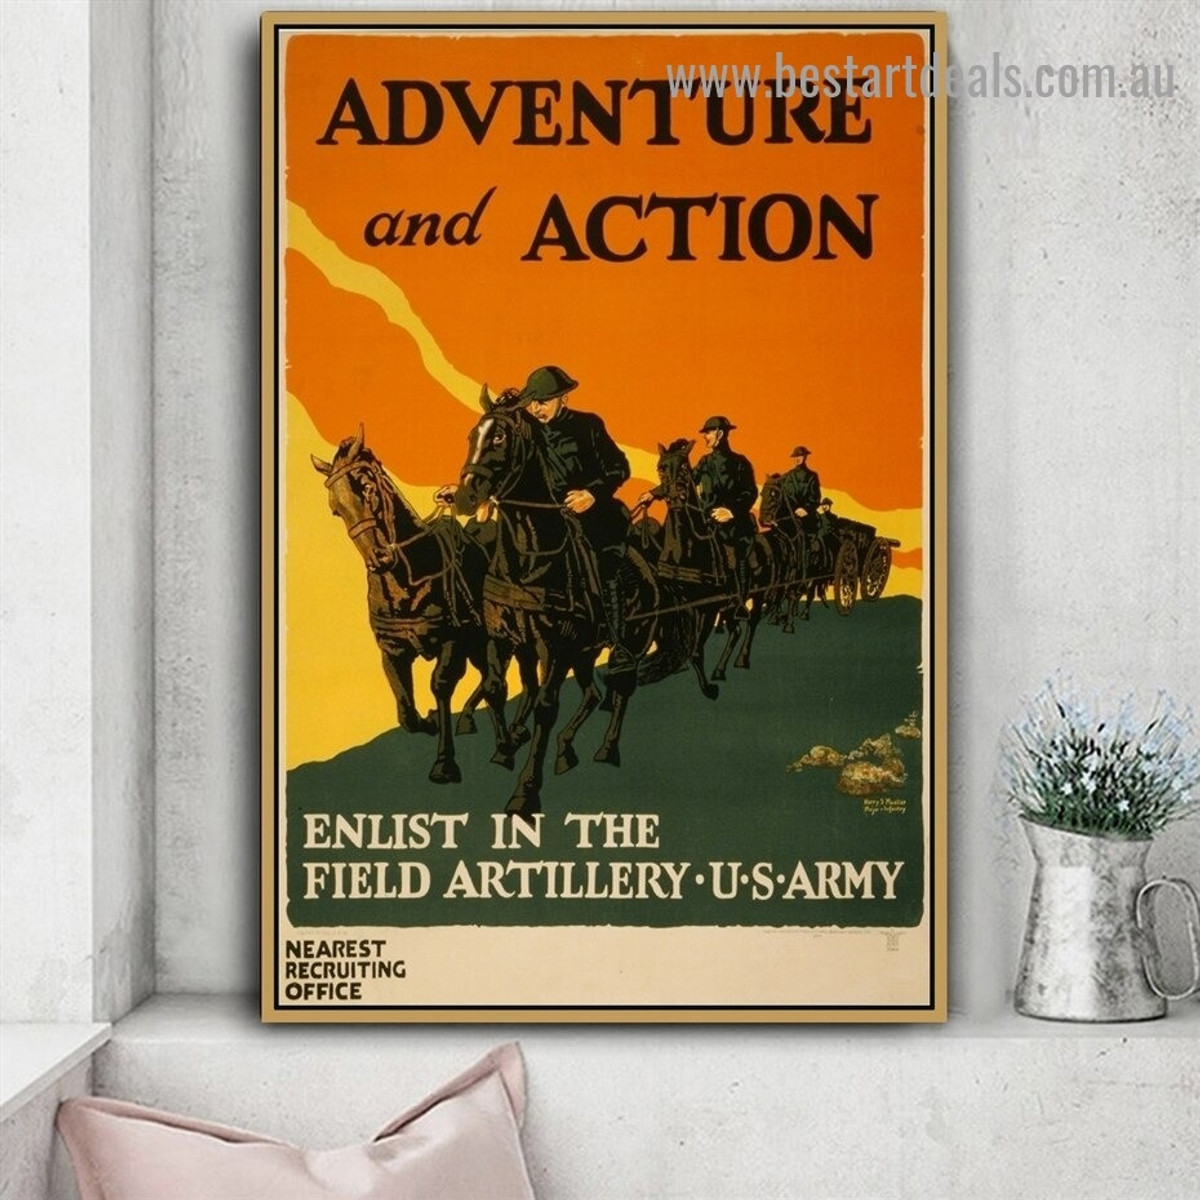 Adventure and Action Enlist In the Field Artillery Figure Animal Landscape Vintage Reproduction Advertisement Artwork Image Canvas Print for Room Wall Ornament